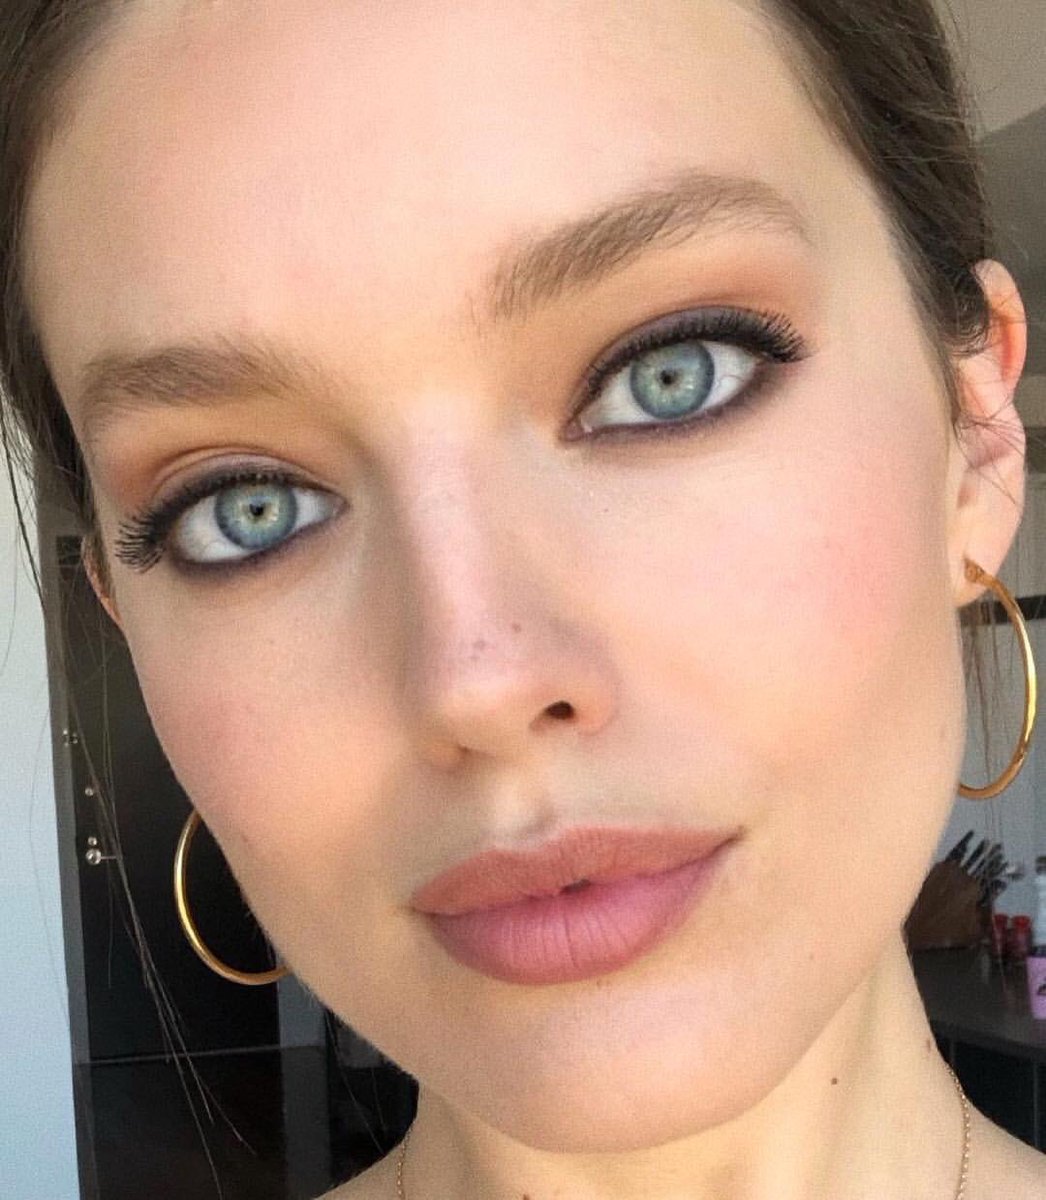 Emily DiDonato Source on Twitter: "#EmilyDiDonato filming a makeup tutorial for her YouTube channel! / Twitter